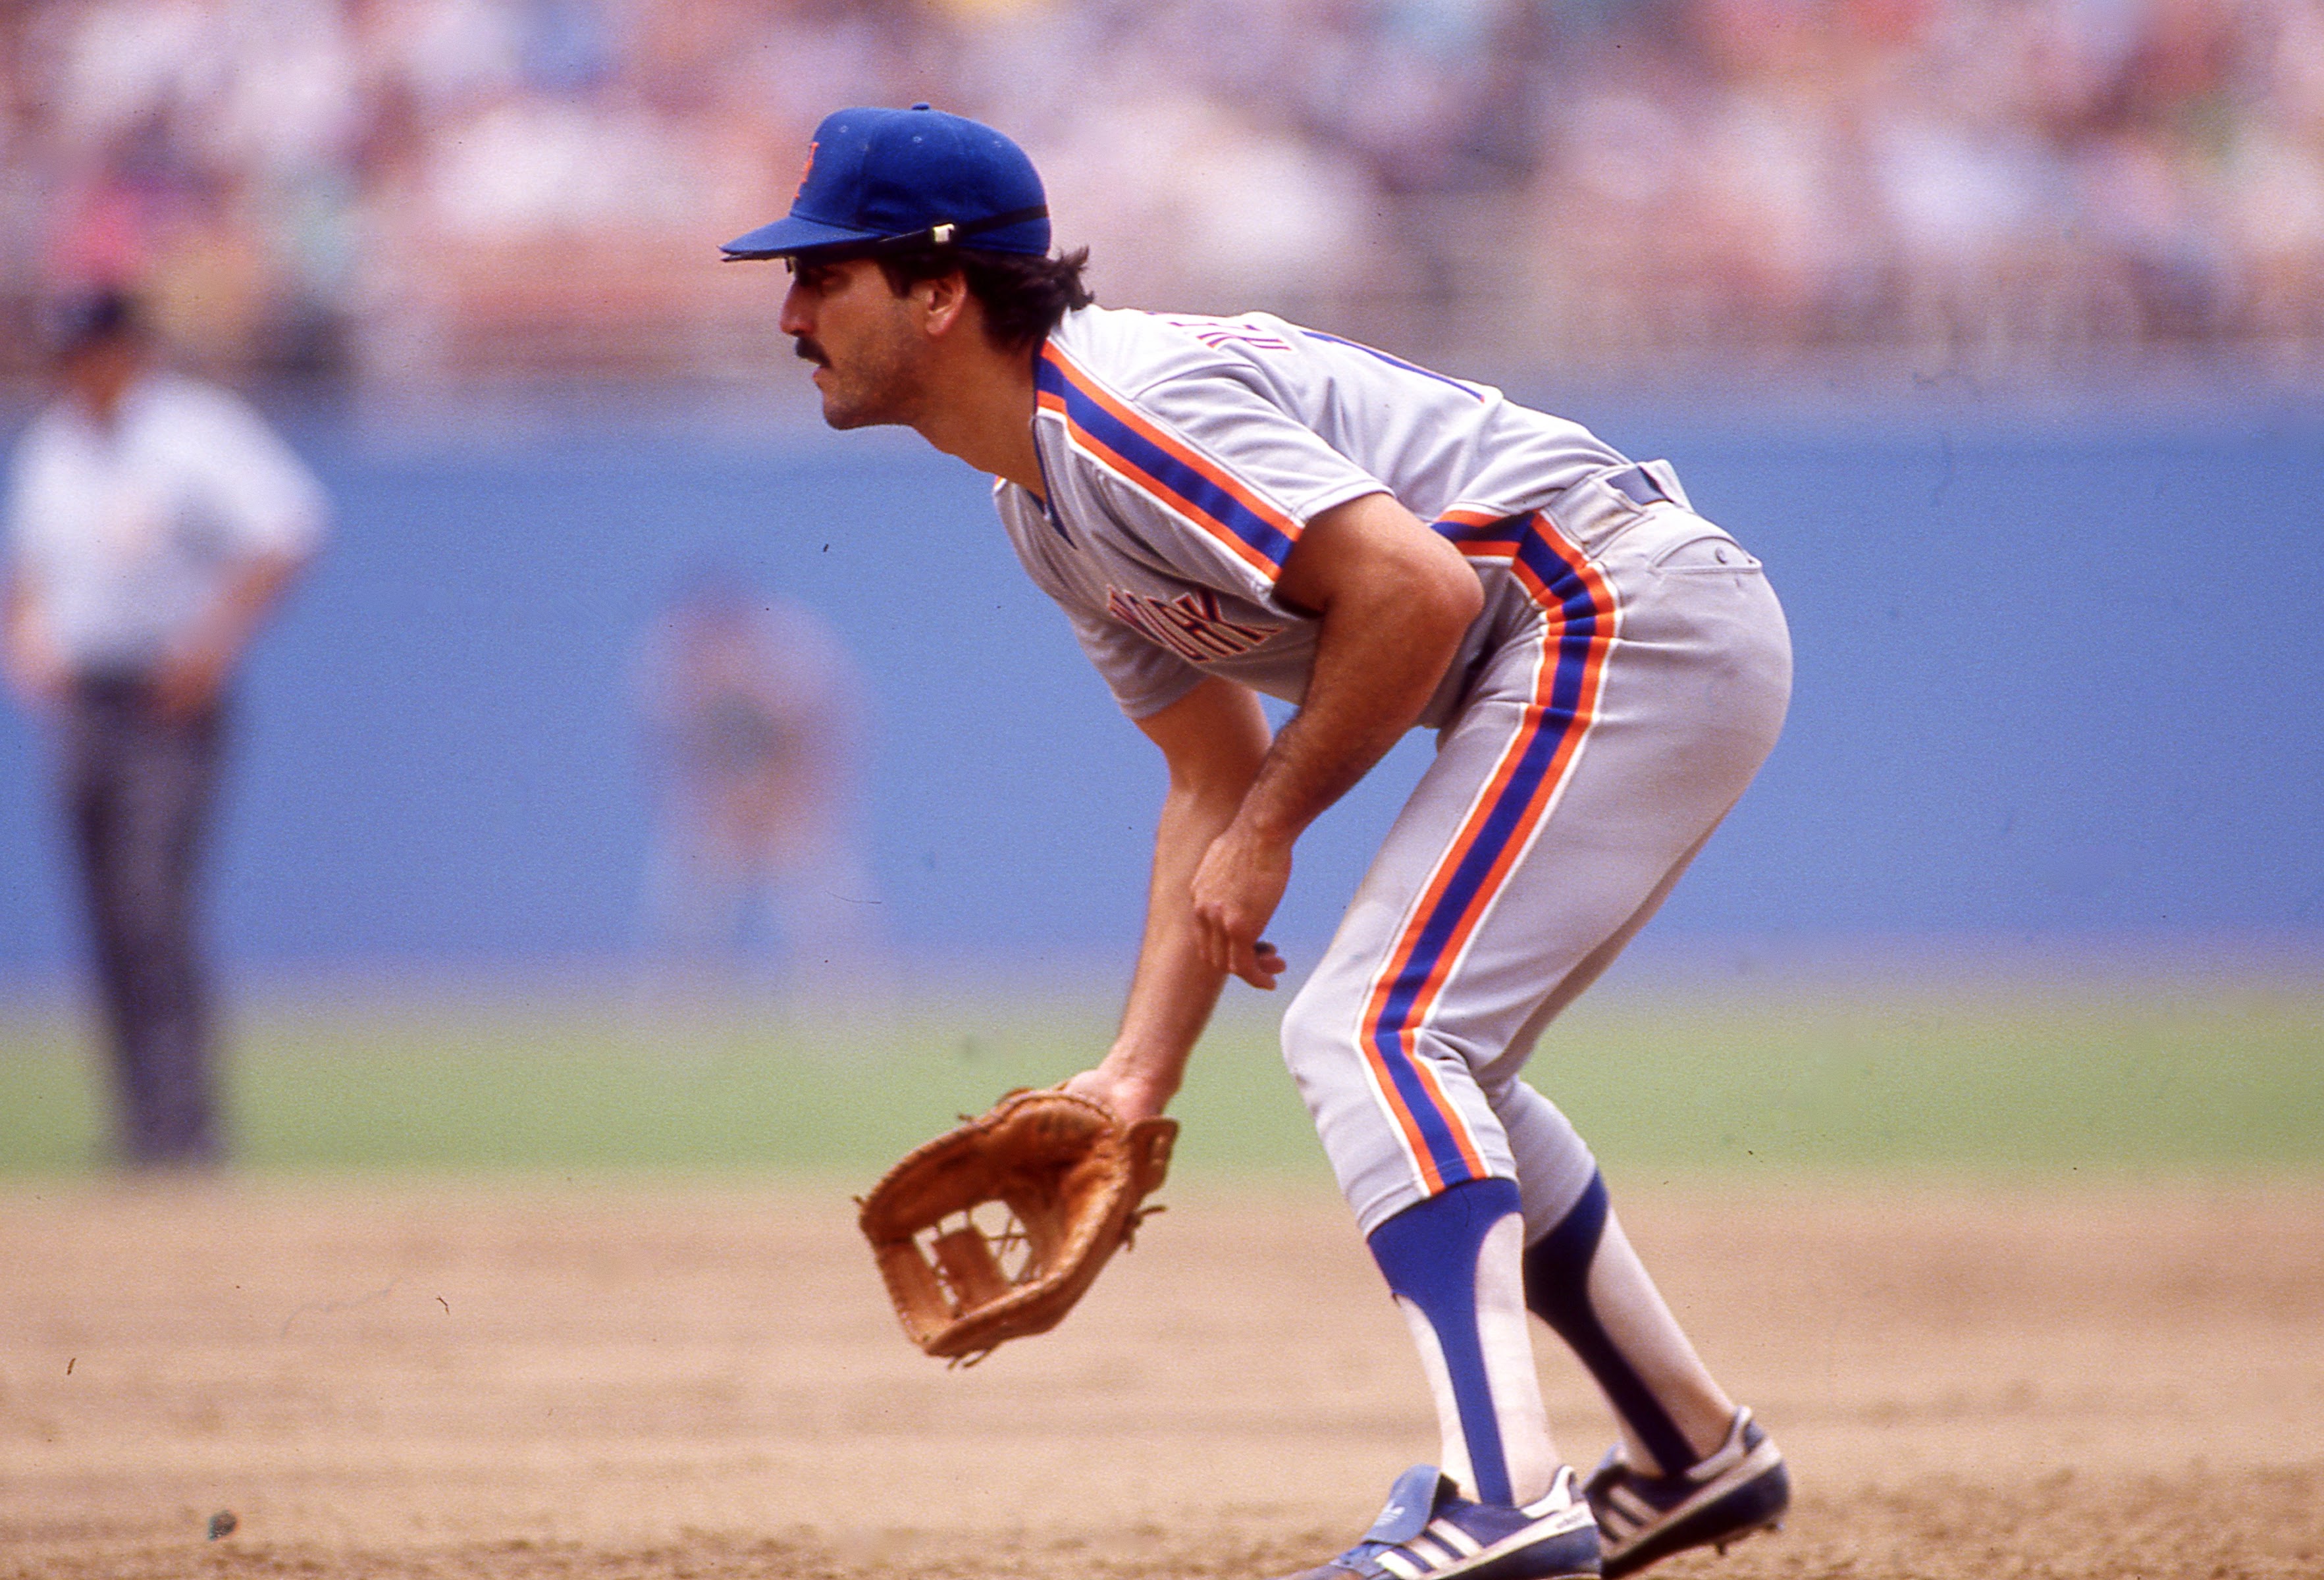 Keith Hernandez (The Mets Championship & NL Eastern Title Years